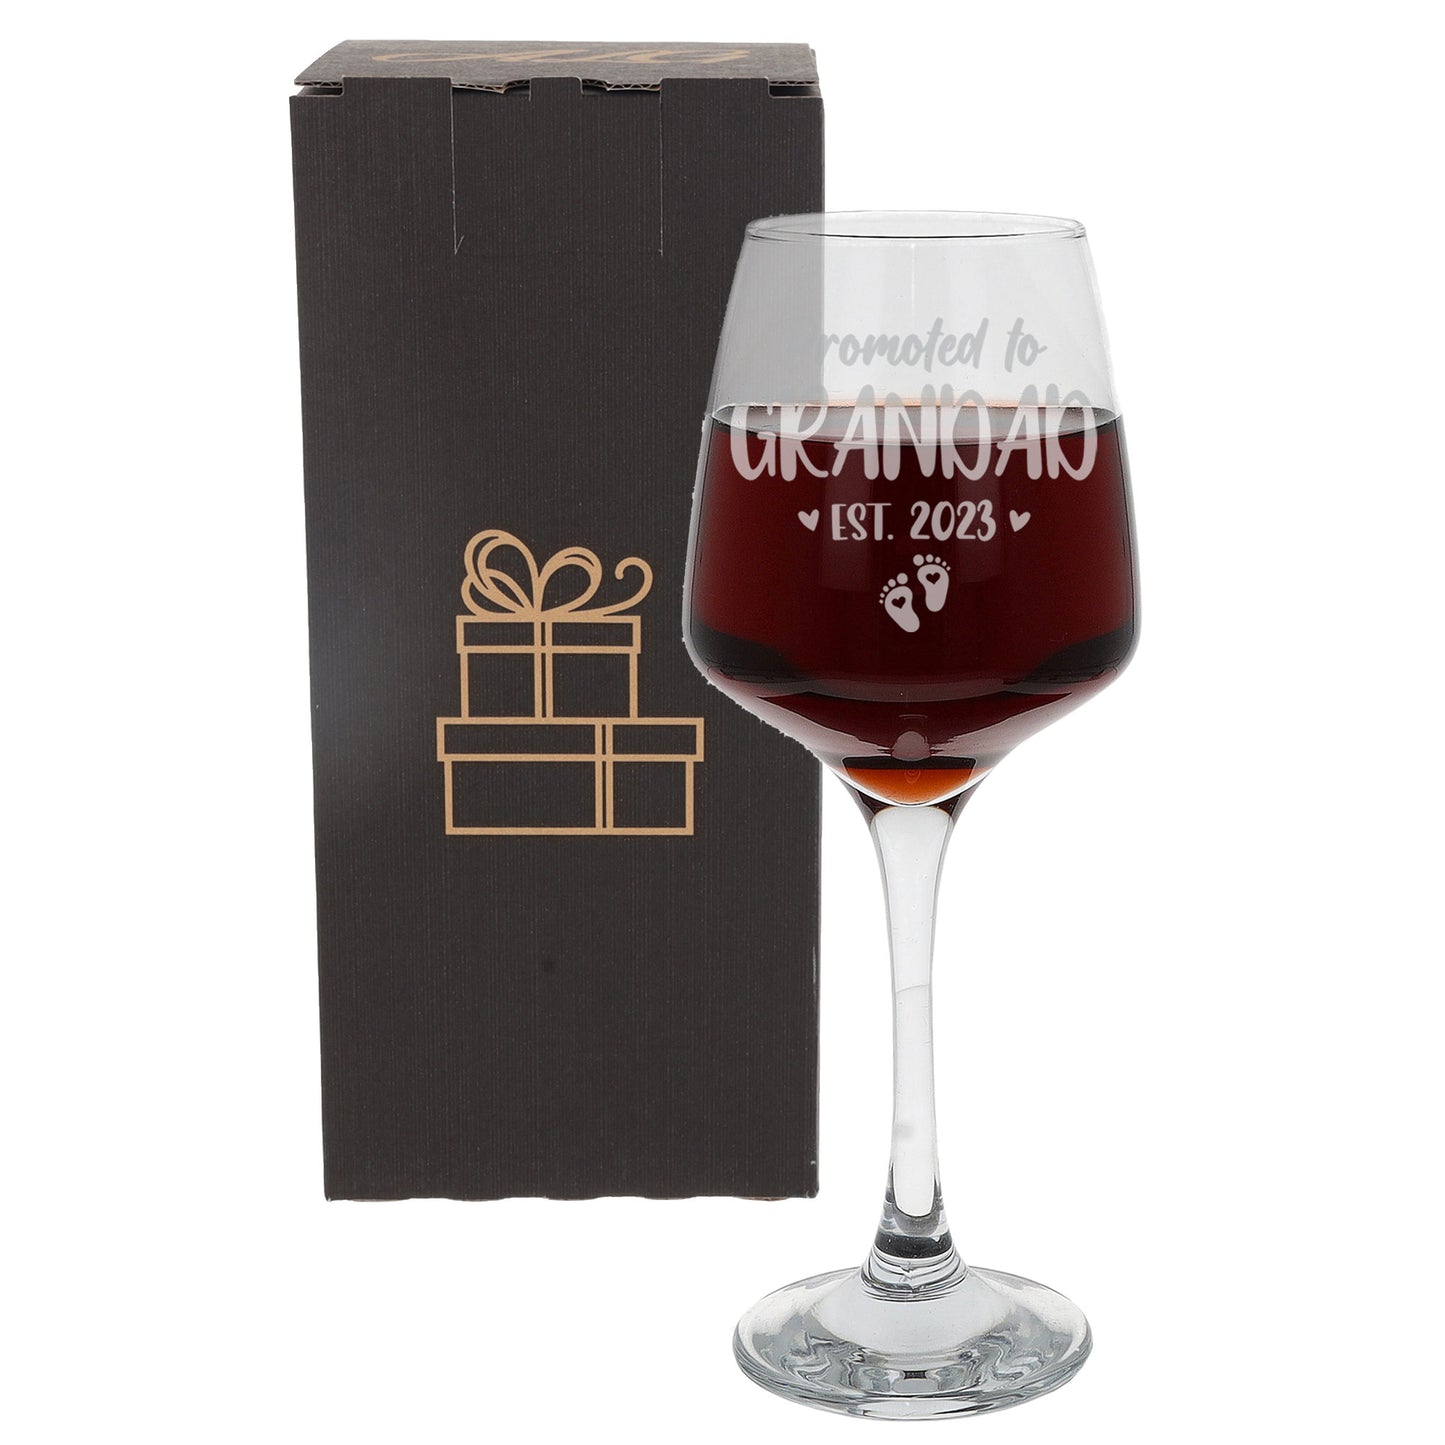 Promoted To Grandad Engraved Wine Glass  - Always Looking Good -   